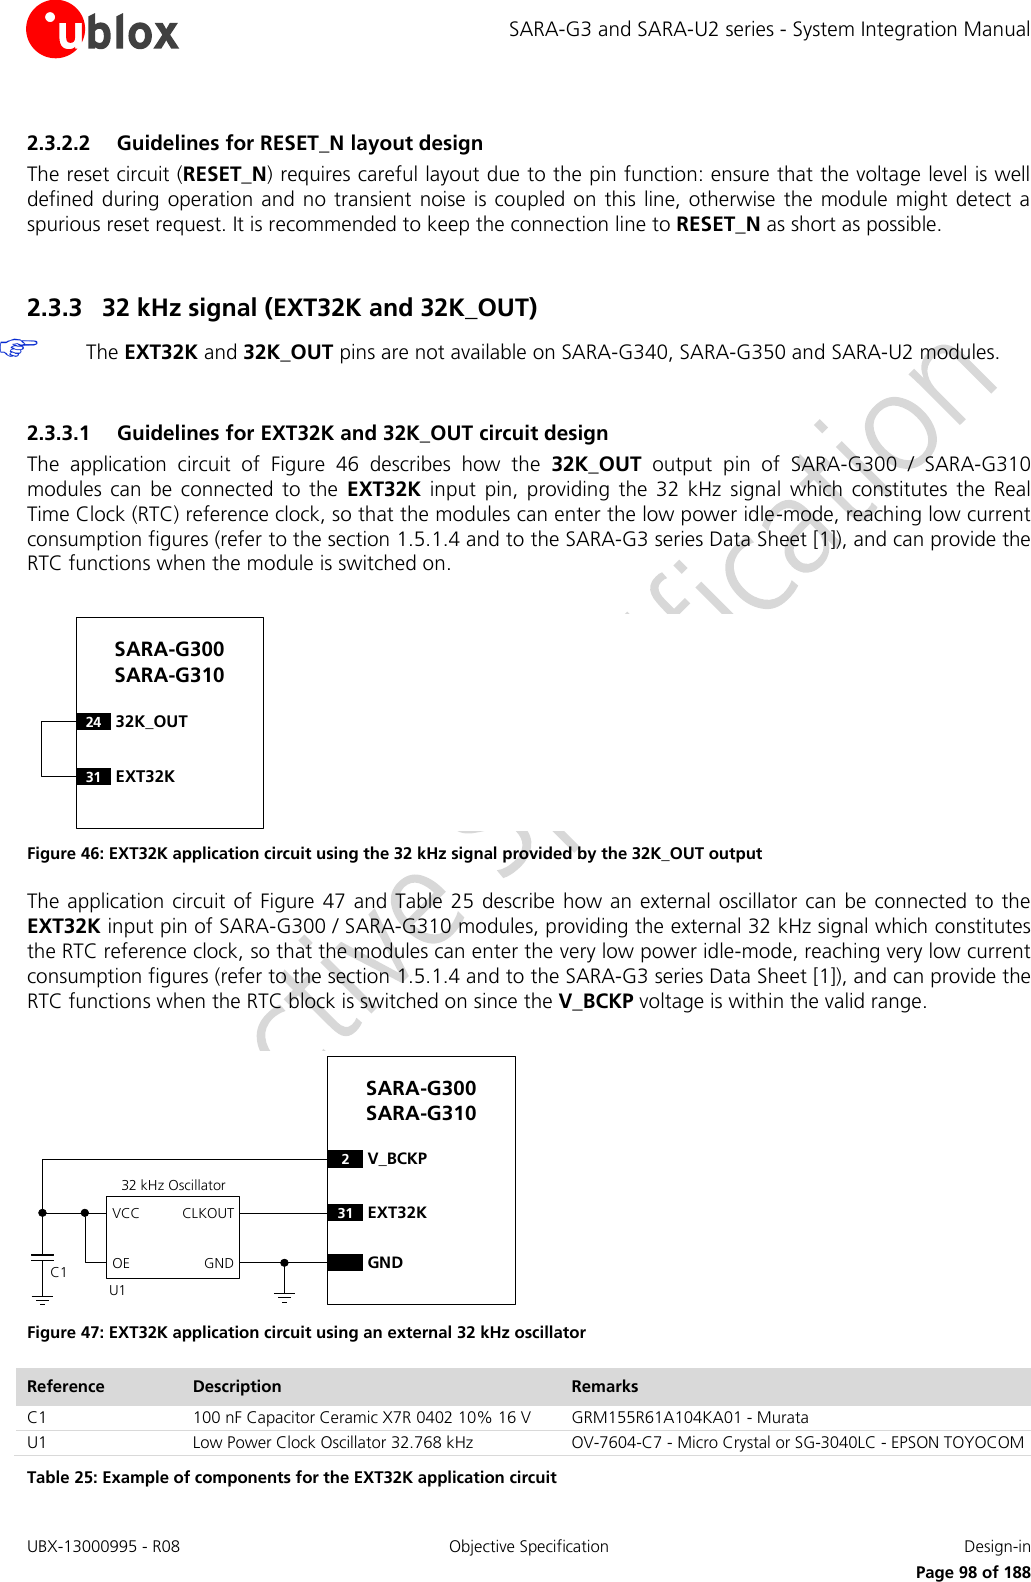 SARA-G3 and SARA-U2 series - System Integration Manual UBX-13000995 - R08  Objective Specification  Design-in     Page 98 of 188 2.3.2.2 Guidelines for RESET_N layout design The reset circuit (RESET_N) requires careful layout due to the pin function: ensure that the voltage level is well defined during  operation and  no transient  noise is coupled on  this line,  otherwise the  module might  detect a spurious reset request. It is recommended to keep the connection line to RESET_N as short as possible.  2.3.3 32 kHz signal (EXT32K and 32K_OUT)  The EXT32K and 32K_OUT pins are not available on SARA-G340, SARA-G350 and SARA-U2 modules.  2.3.3.1 Guidelines for EXT32K and 32K_OUT circuit design The  application  circuit  of  Figure  46  describes  how  the  32K_OUT  output  pin  of  SARA-G300  /  SARA-G310 modules  can  be  connected  to the  EXT32K  input  pin,  providing  the  32  kHz  signal  which  constitutes  the  Real Time Clock (RTC) reference clock, so that the modules can enter the low power idle-mode, reaching low current consumption figures (refer to the section 1.5.1.4 and to the SARA-G3 series Data Sheet [1]), and can provide the RTC functions when the module is switched on.  24 32K_OUTSARA-G300 SARA-G31031 EXT32K Figure 46: EXT32K application circuit using the 32 kHz signal provided by the 32K_OUT output The application  circuit of  Figure 47  and Table  25 describe how  an external oscillator  can be connected to the EXT32K input pin of SARA-G300 / SARA-G310 modules, providing the external 32 kHz signal which constitutes the RTC reference clock, so that the modules can enter the very low power idle-mode, reaching very low current consumption figures (refer to the section 1.5.1.4 and to the SARA-G3 series Data Sheet [1]), and can provide the RTC functions when the RTC block is switched on since the V_BCKP voltage is within the valid range.  2V_BCKPGNDSARA-G300 SARA-G31031 EXT32K32 kHz OscillatorGNDCLKOUTOEVCCC1U1 Figure 47: EXT32K application circuit using an external 32 kHz oscillator Reference Description Remarks C1 100 nF Capacitor Ceramic X7R 0402 10% 16 V GRM155R61A104KA01 - Murata U1 Low Power Clock Oscillator 32.768 kHz OV-7604-C7 - Micro Crystal or SG-3040LC - EPSON TOYOCOM Table 25: Example of components for the EXT32K application circuit 